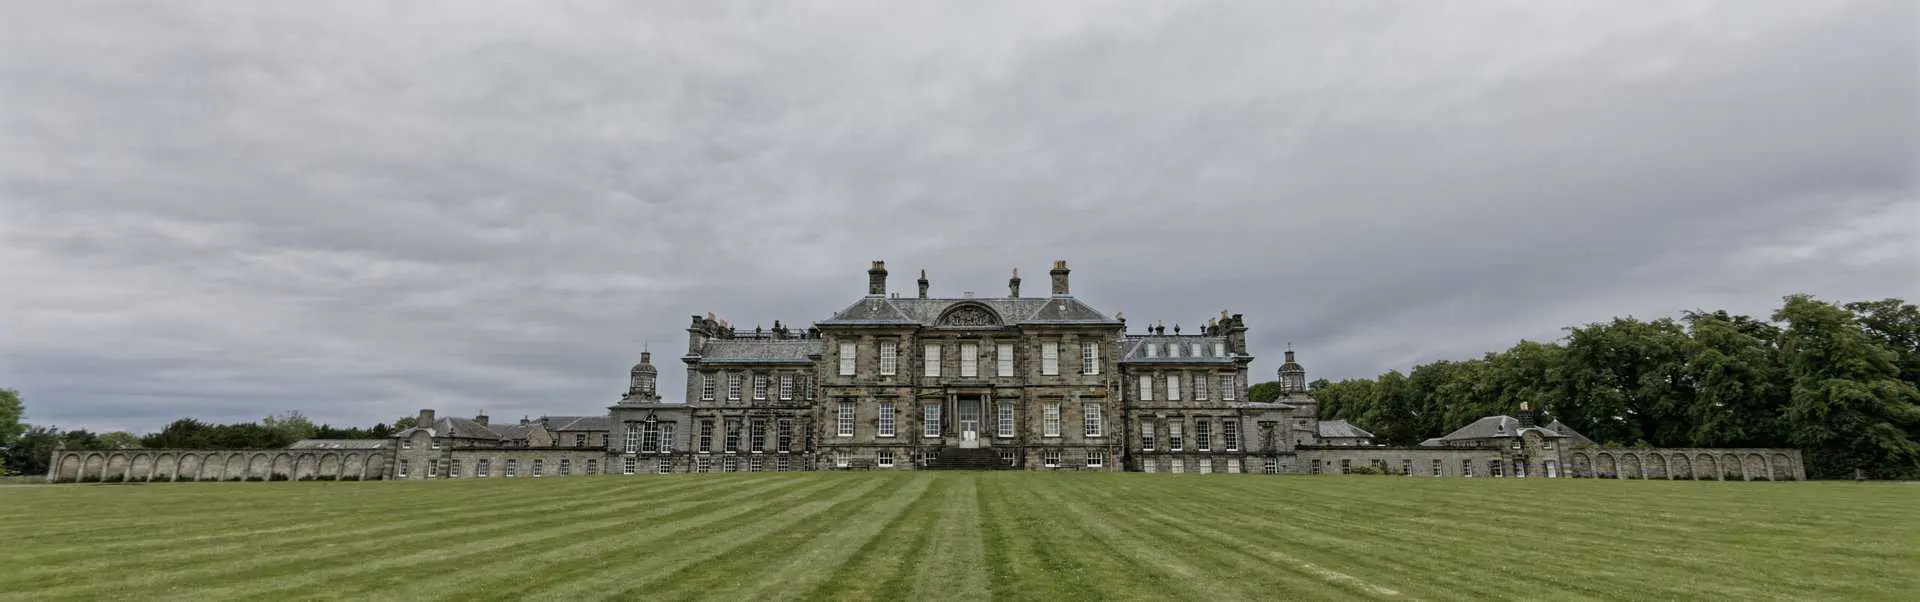 Hopetoun House min scaled The best-selling author Diana Gabaldon has managed to create a world that has captivated fans and readers for decades. Even though she hadn't set foot in Scotland when she began writing her book series Outlander, the basis of the popular TV series of the same name, she did capture the history and culture of the beautiful country. 